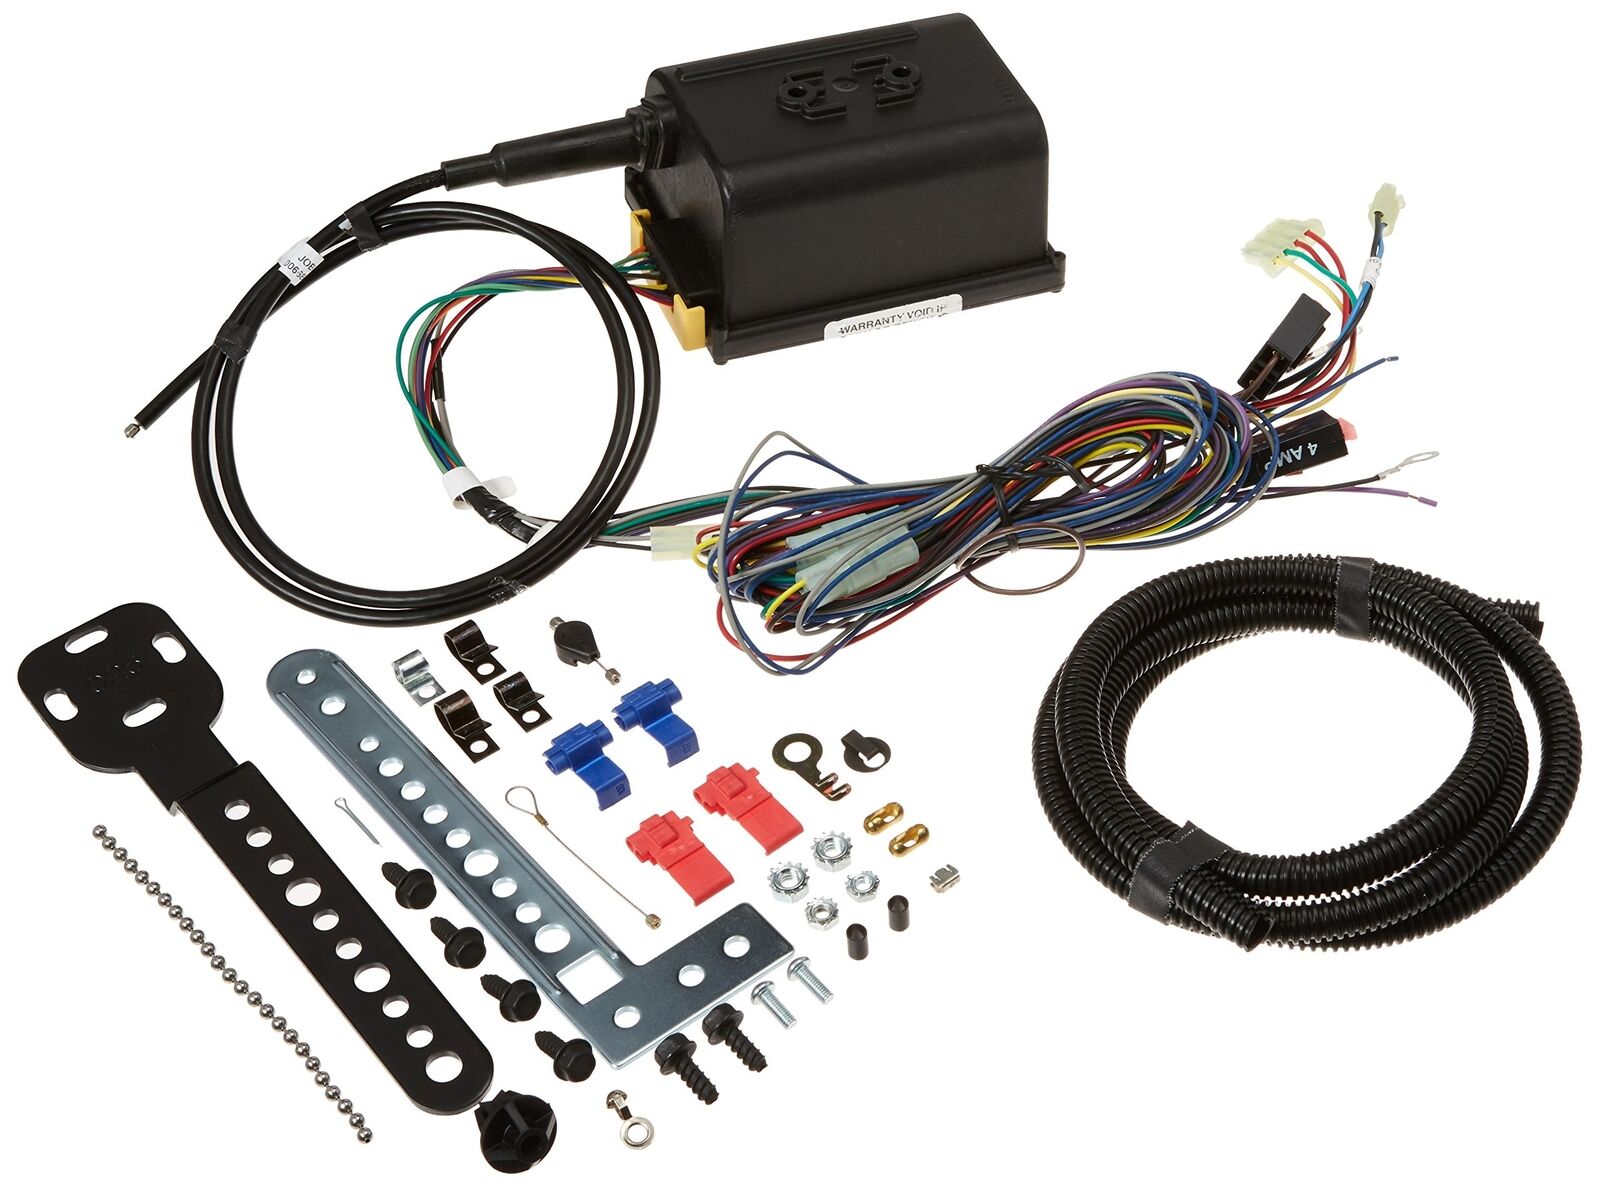 Rostra 250-1223 Universal Electronic Cruise Control